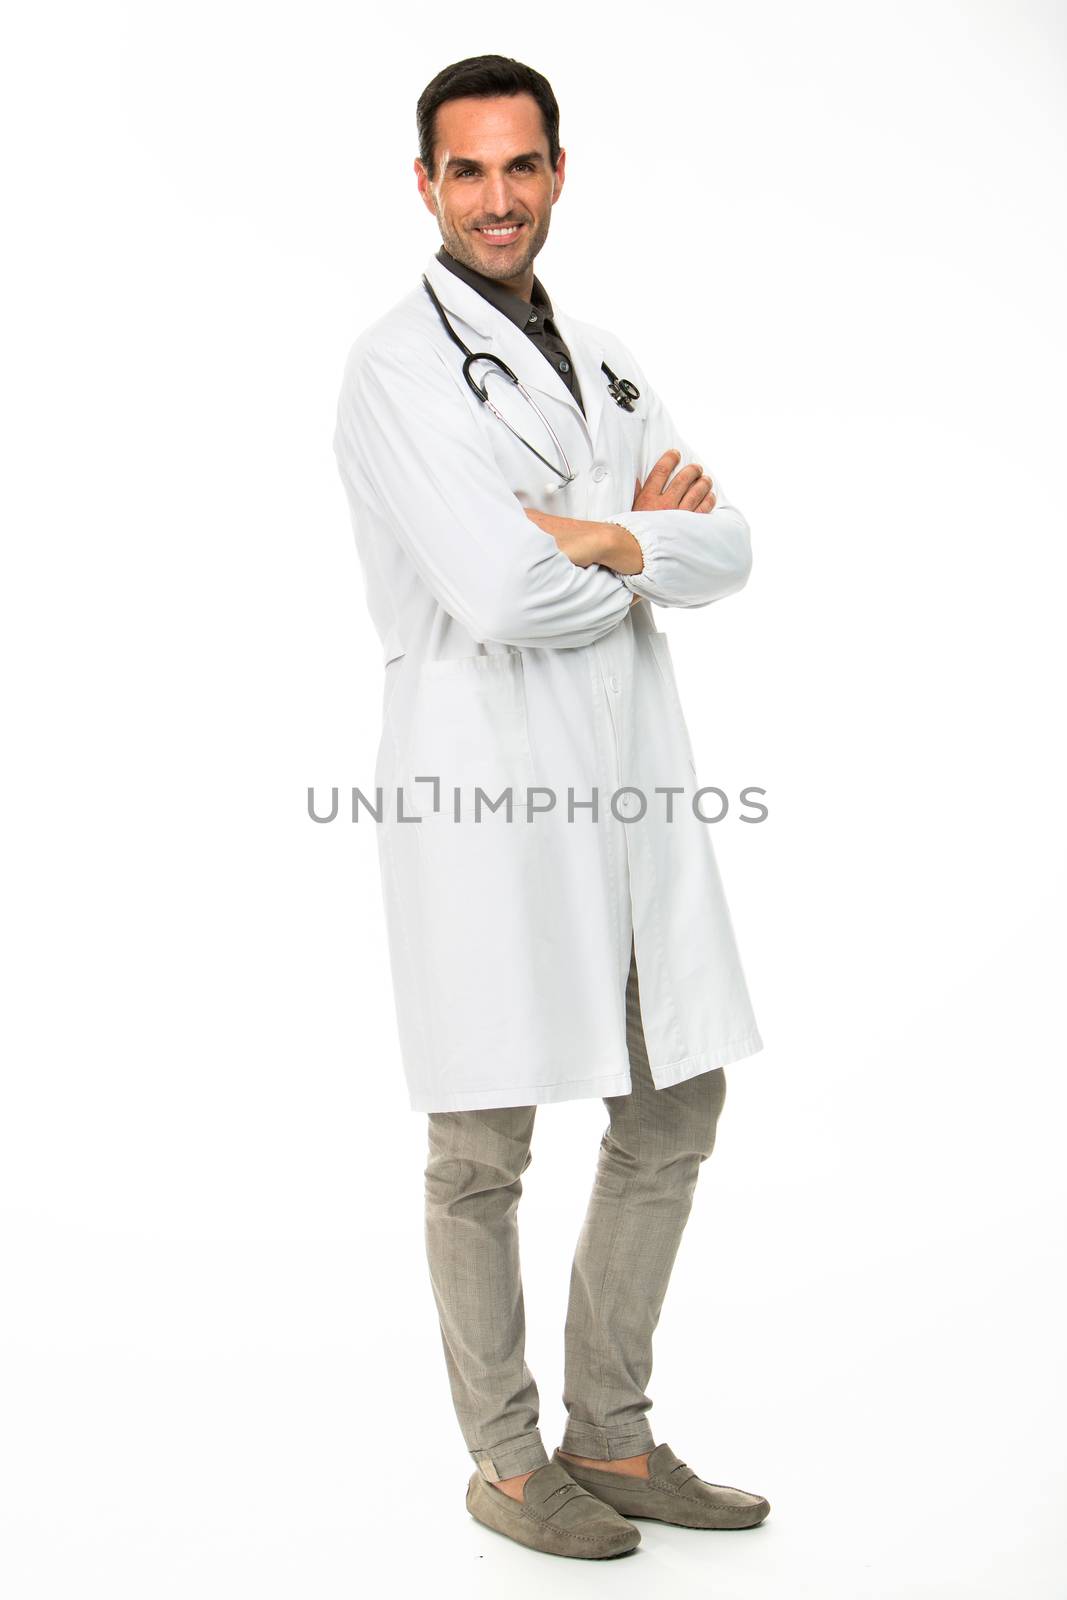 Full length portraif of a male doctor, smiling at camera with crossed arms and stethoscope